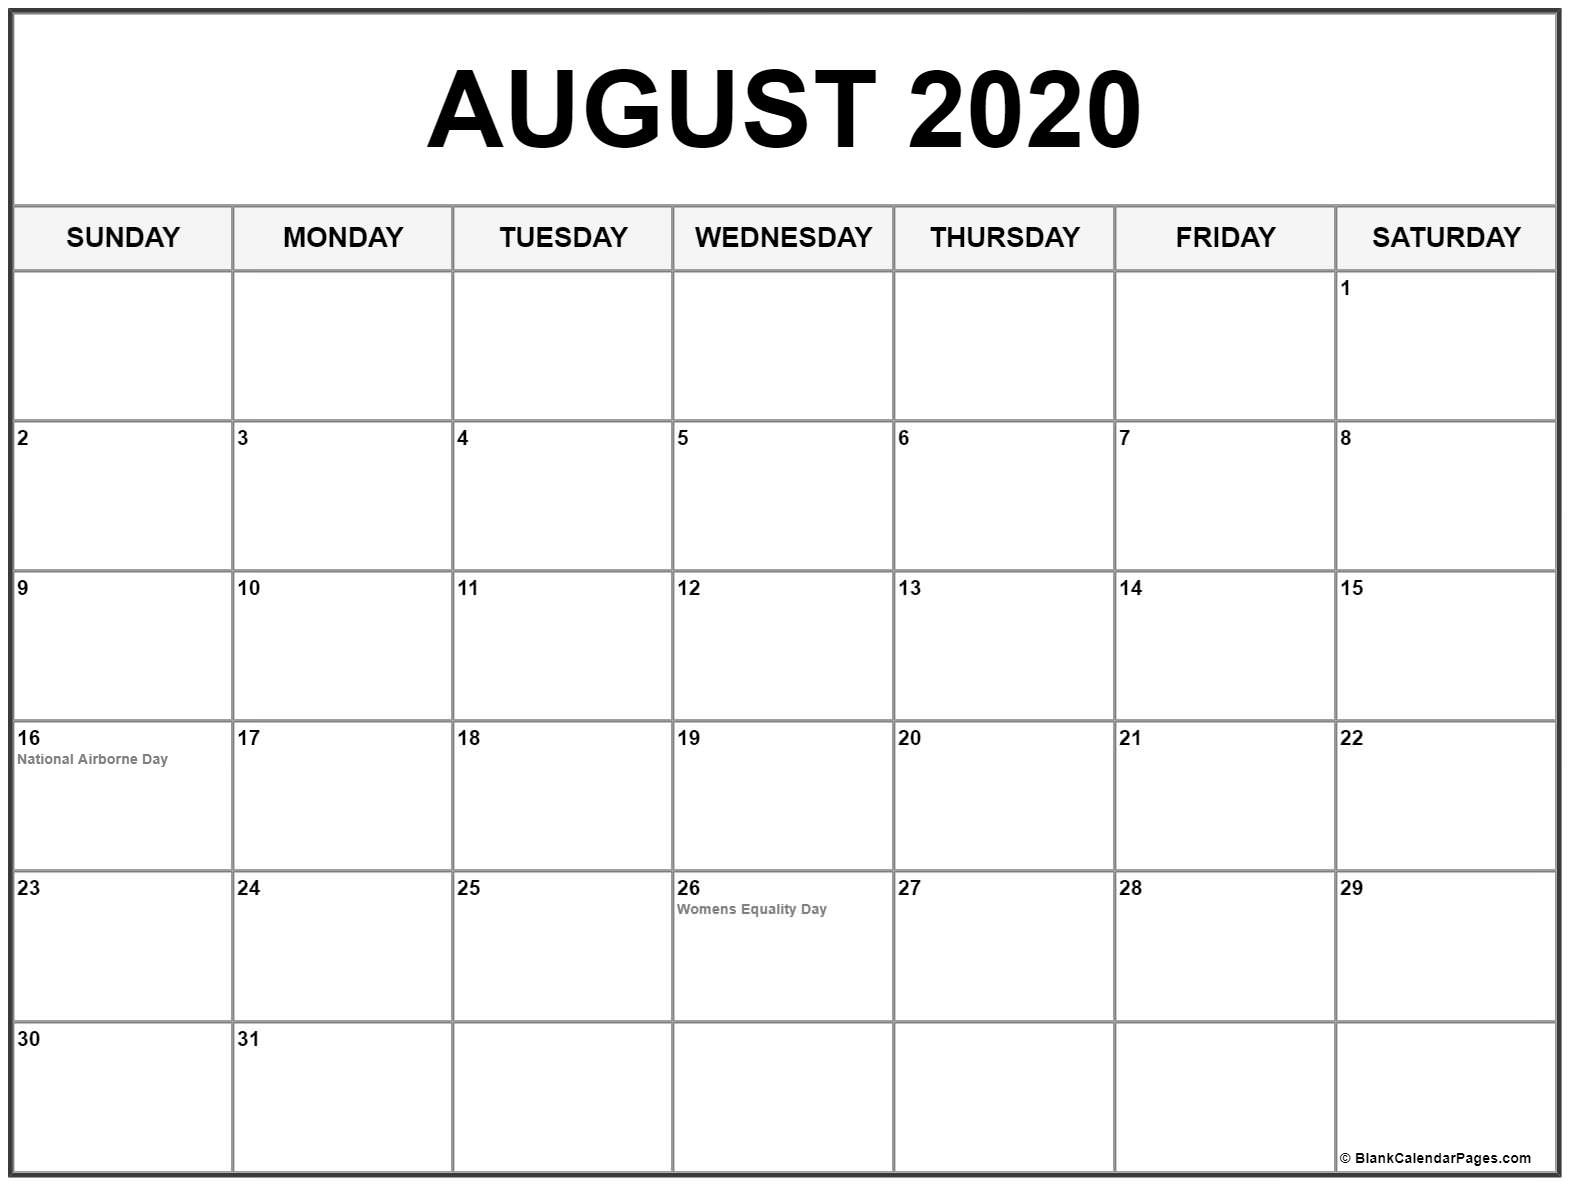 collection of august 2020 calendars with holidays